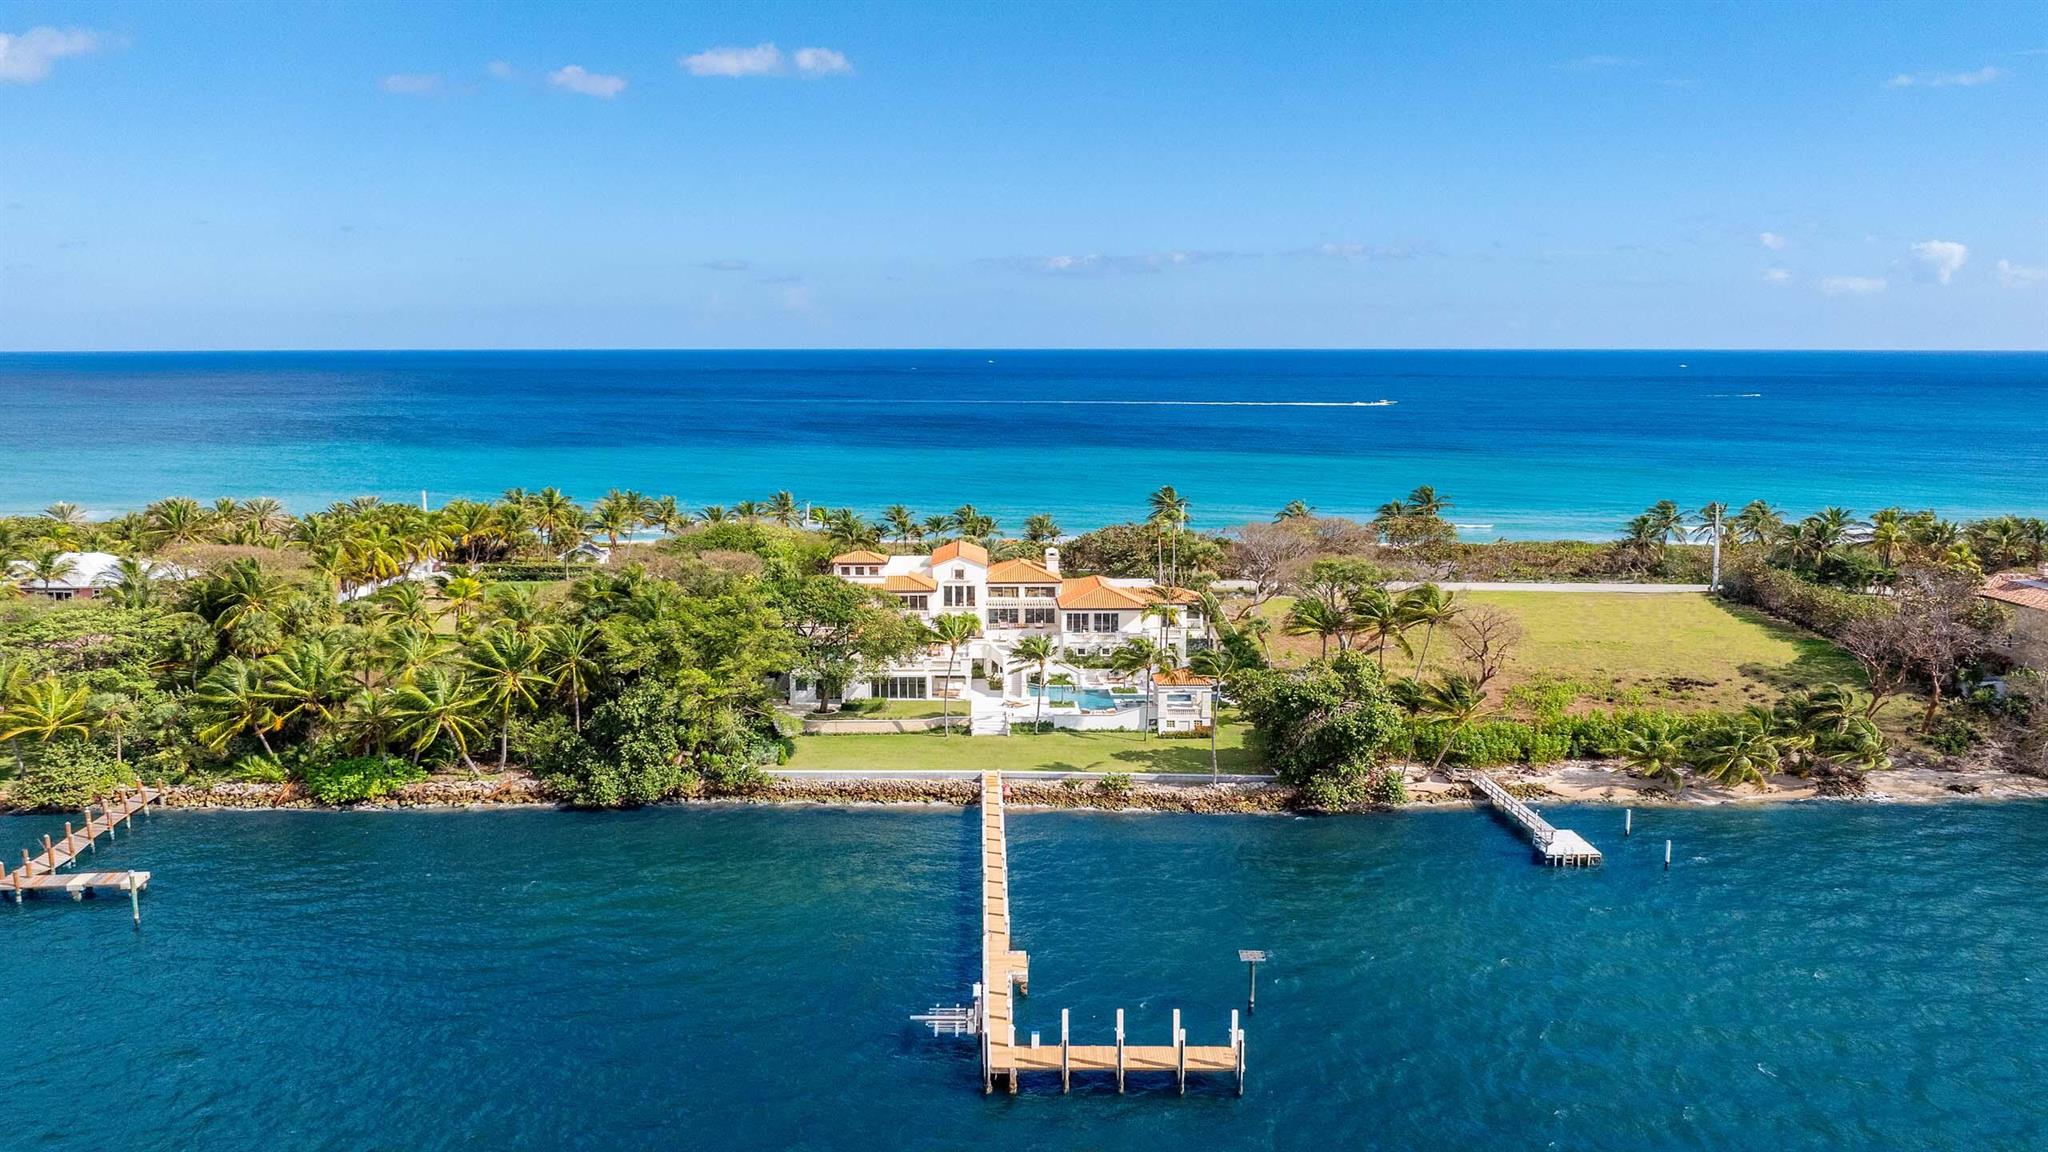 Recently updated, this stunning Ocean-to-Intracoastal Manalapan compound with beach house is situated on almost two acres with 150 feet of direct ocean and Intracoastal Waterway frontage. Boasting over 20,600 total square feet, the residence offers scenic ocean and Intracoastal views throughout and eight total bedrooms including luxurious primary wing plus private office and gym. Many upgrades include new flooring; all new bathrooms; and new impact sliders. Multi-level terraces and balconies provide ample room for outdoor living and dining. The manicured grounds include resort-style pool with spa; new landscape; and sprawling lawn that overlooks 150 feet of Intracoastal waterfrontage. Boaters will appreciate the large dock and new seawall plus easy ocean access via nearby inlets. FEATURES:
Located in Manalapan, Florida
Ocean-to-Intracoastal Compound situated on 1.85 acres
150 feet of direct ocean frontage with beach house
150 feet of direct Intracoastal Waterway frontage with large dock and new seawall
8 total bedrooms / 7 full and 1 half baths
11,953 square feet under air / 19,606 total square feet
Decorative drive and porte cochere entryway
Spacious living room with fireplace; volume ceilings; and walls of windows and sliders for water views of the ocean and Intracoastal
Formal Dining room with easy access to kitchen and wine room
Large, open kitchen with two islands; lots of cabinets; breakfast area; and access to the outdoor dining area
Casual living room with bar and walls of windows sliders overlooking the grounds and Intracoastal
Beautiful winding staircases and elevator
Private office, gym, and additional sitting areas
First floor luxurious primary wing with sitting area; ocean and Intracoastal views; walk-in closets; and expansive bath with two showers, roman tub, and two water closets.
Multi-level terraces with wide water views and ample space for outdoor dining and living areas
Rooftop observation terrace with indoor wet bar
Resort style heated pool with spa overlooking the Intracoastal Waterway
Tranquil green spaces; large open lawn; and manicured landscape
New seawall and large dock with ocean access via nearby inlets
Private beach house with living area; bedroom and bathroom; seaside deck; and path through dune to the beach
Recent updates include 5 new ac units; new impact sliders throughout; remainder of windows replaced with impact glass; power shutters in place; Control4 system installed for main areas and primary wing (can be expanded); all bathrooms remodeled; primary bath extended to allow for two showers and separate water closets; new flooring in several areas; new seawall on Intracoastal Waterway to allow for a graded green space; new landscaping; new pavers; new skylights; and refinished pool with new water line tile
Ideally located between Palm Beach and Delray Beach; enjoyable drive along A1A for shopping and dining enjoyment.